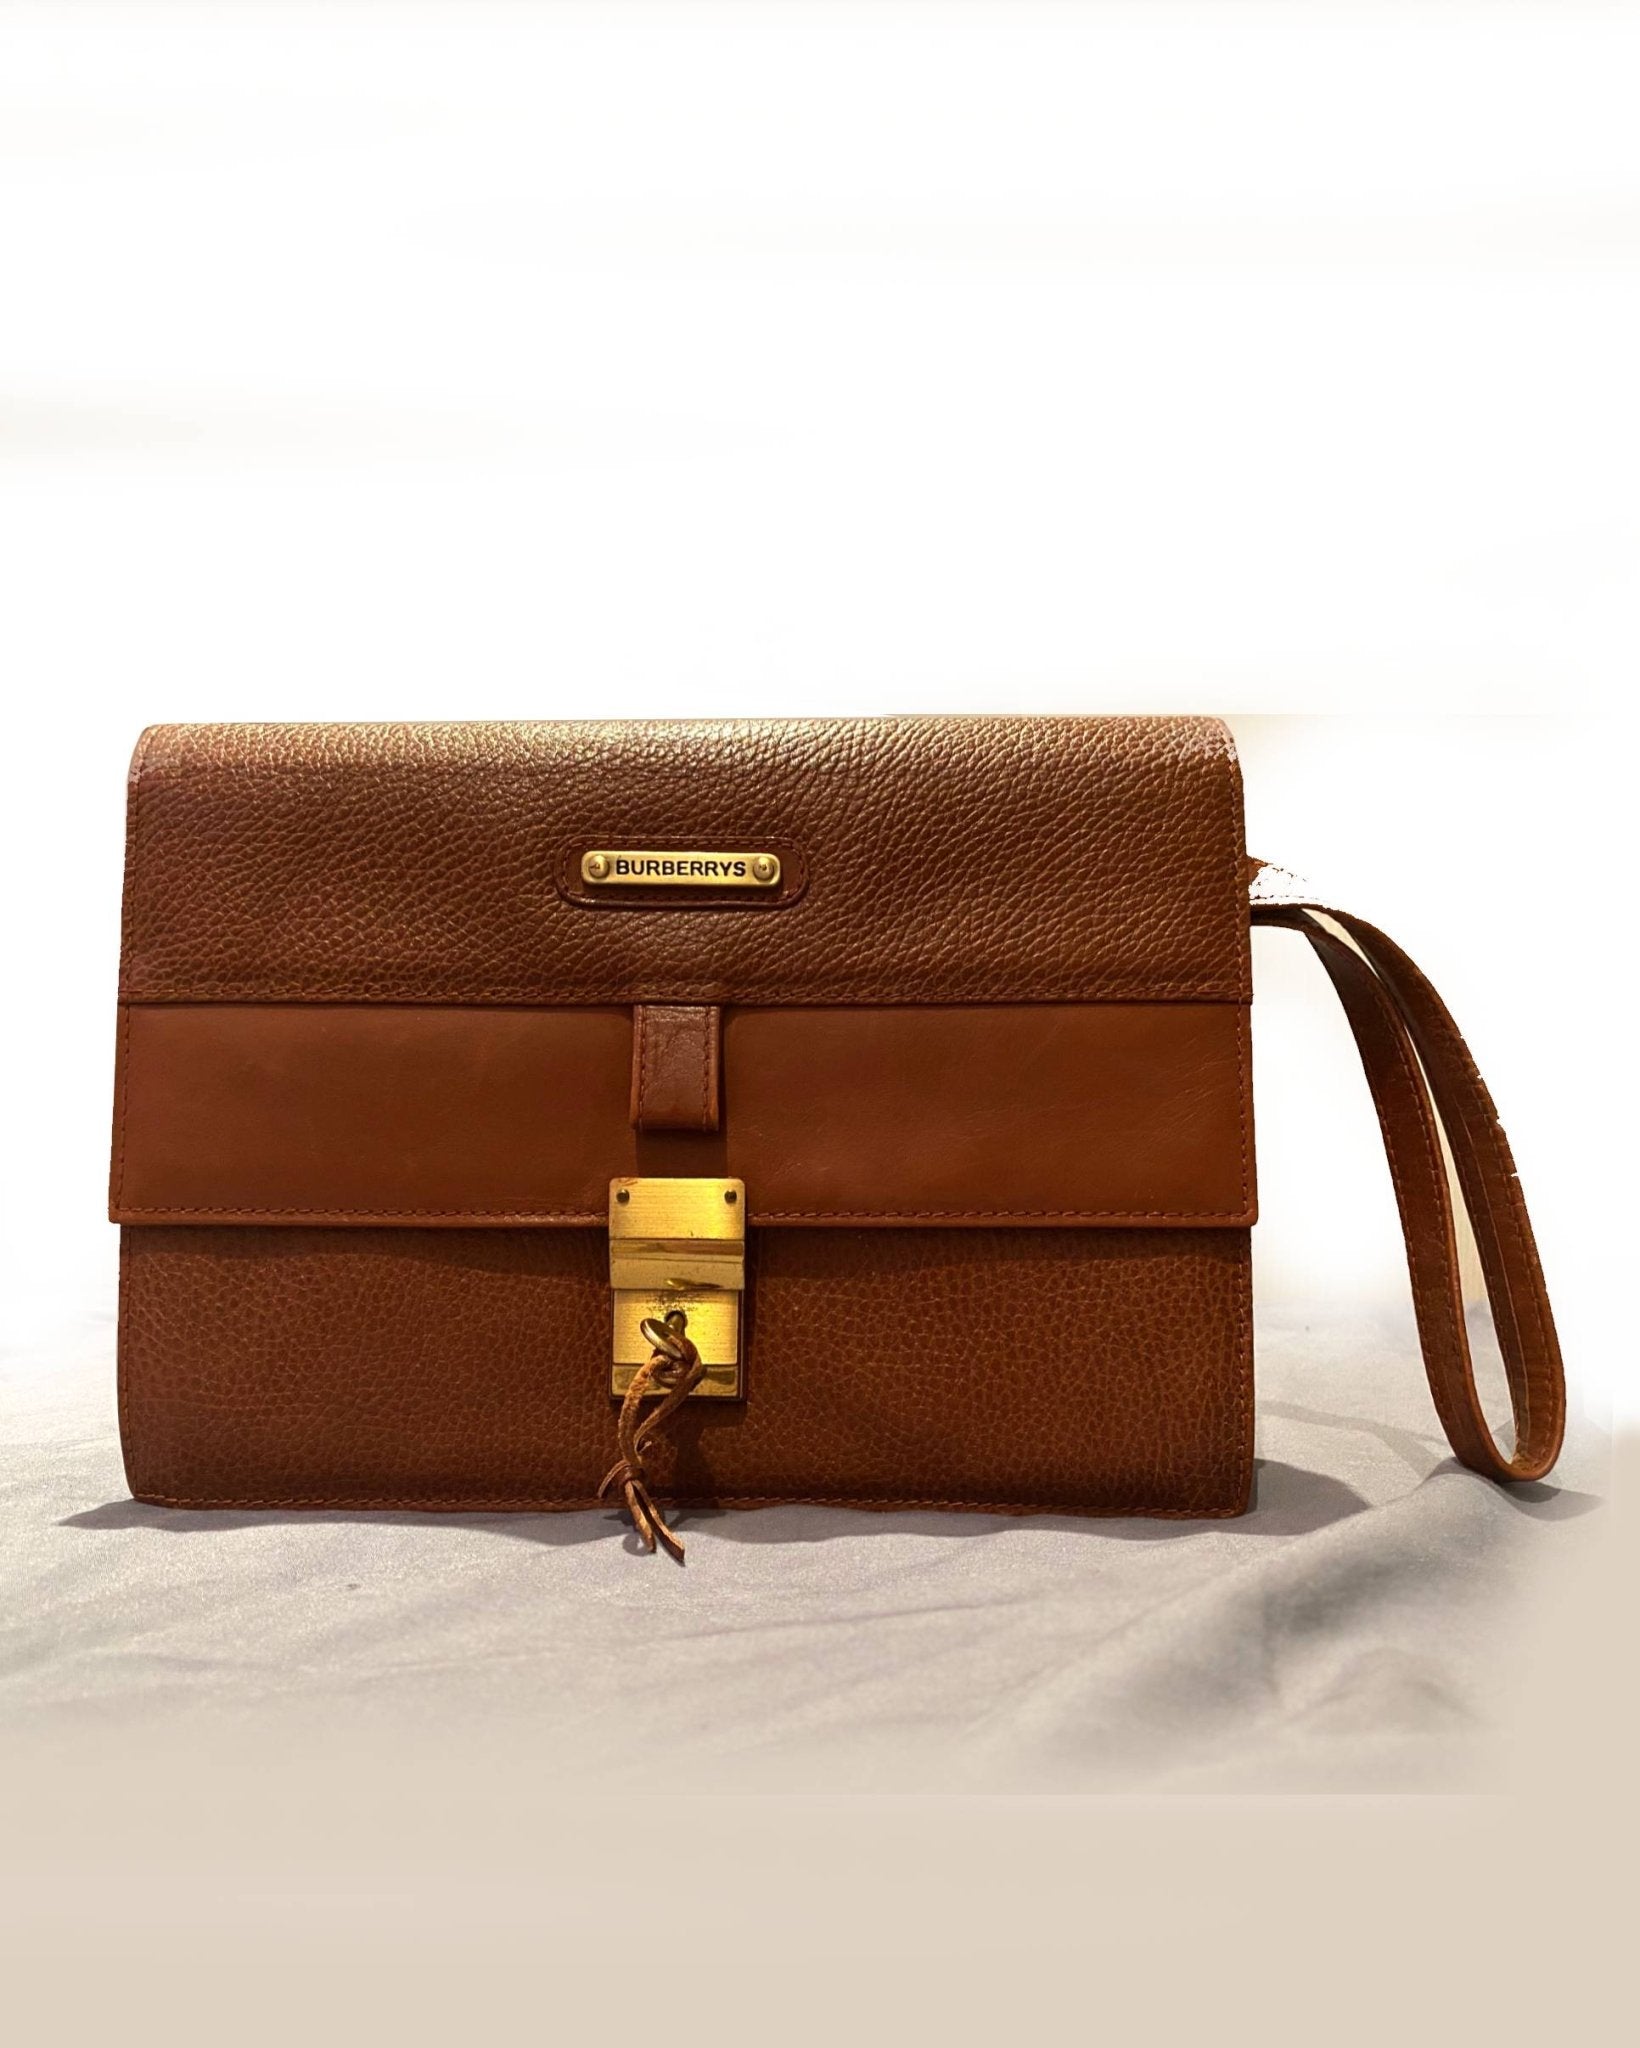 1980s BURBERRY'S BROWN LEATHER WRIST ENVELOPE BAG - style - CHNGR